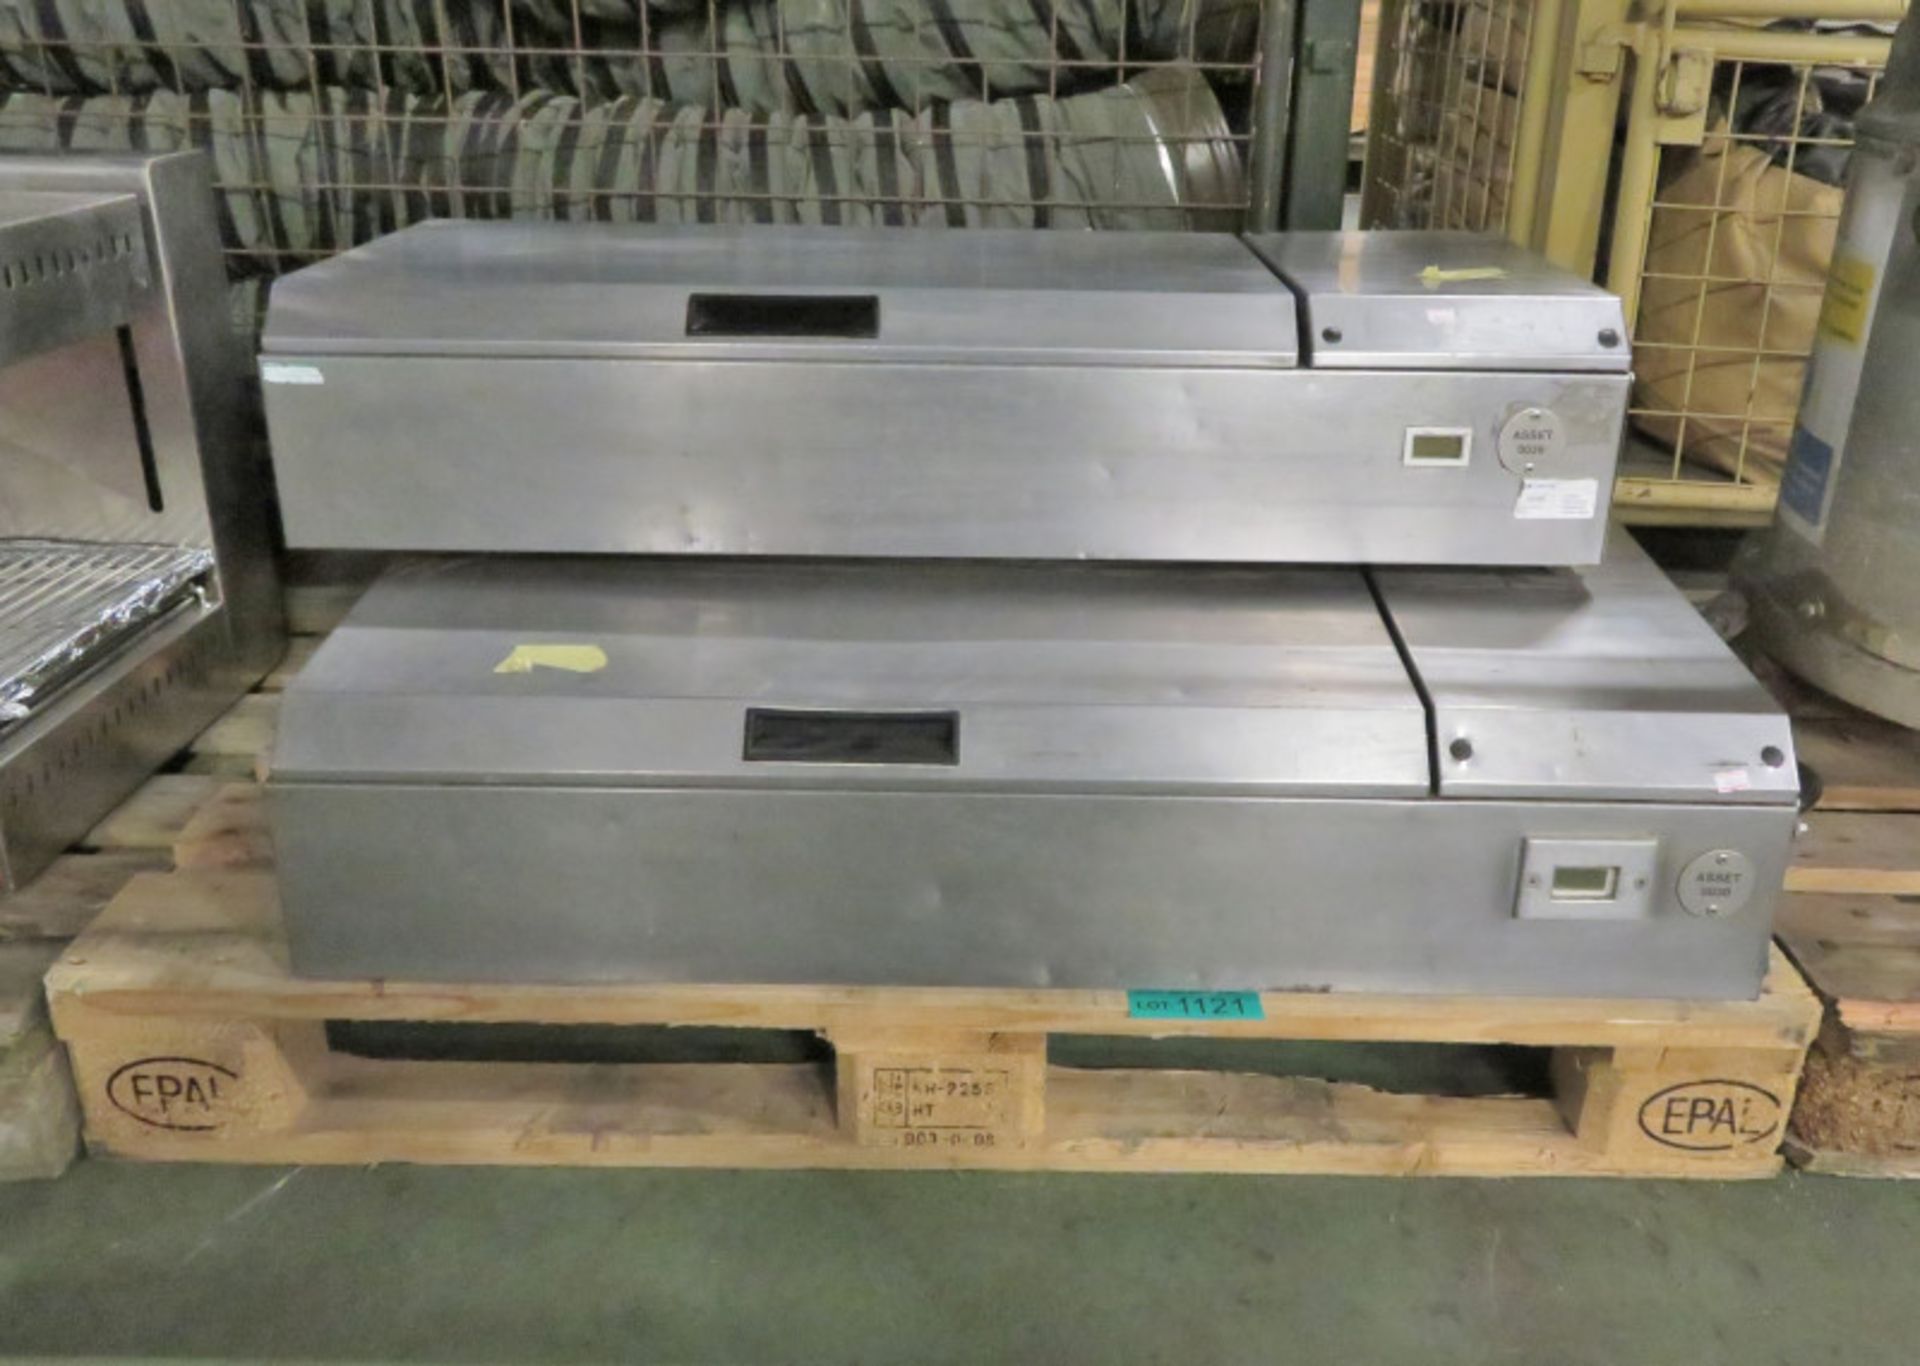 3x William TW9 Refrigerated Thermowells - H230 x W1860 x D380mm - Image 2 of 4